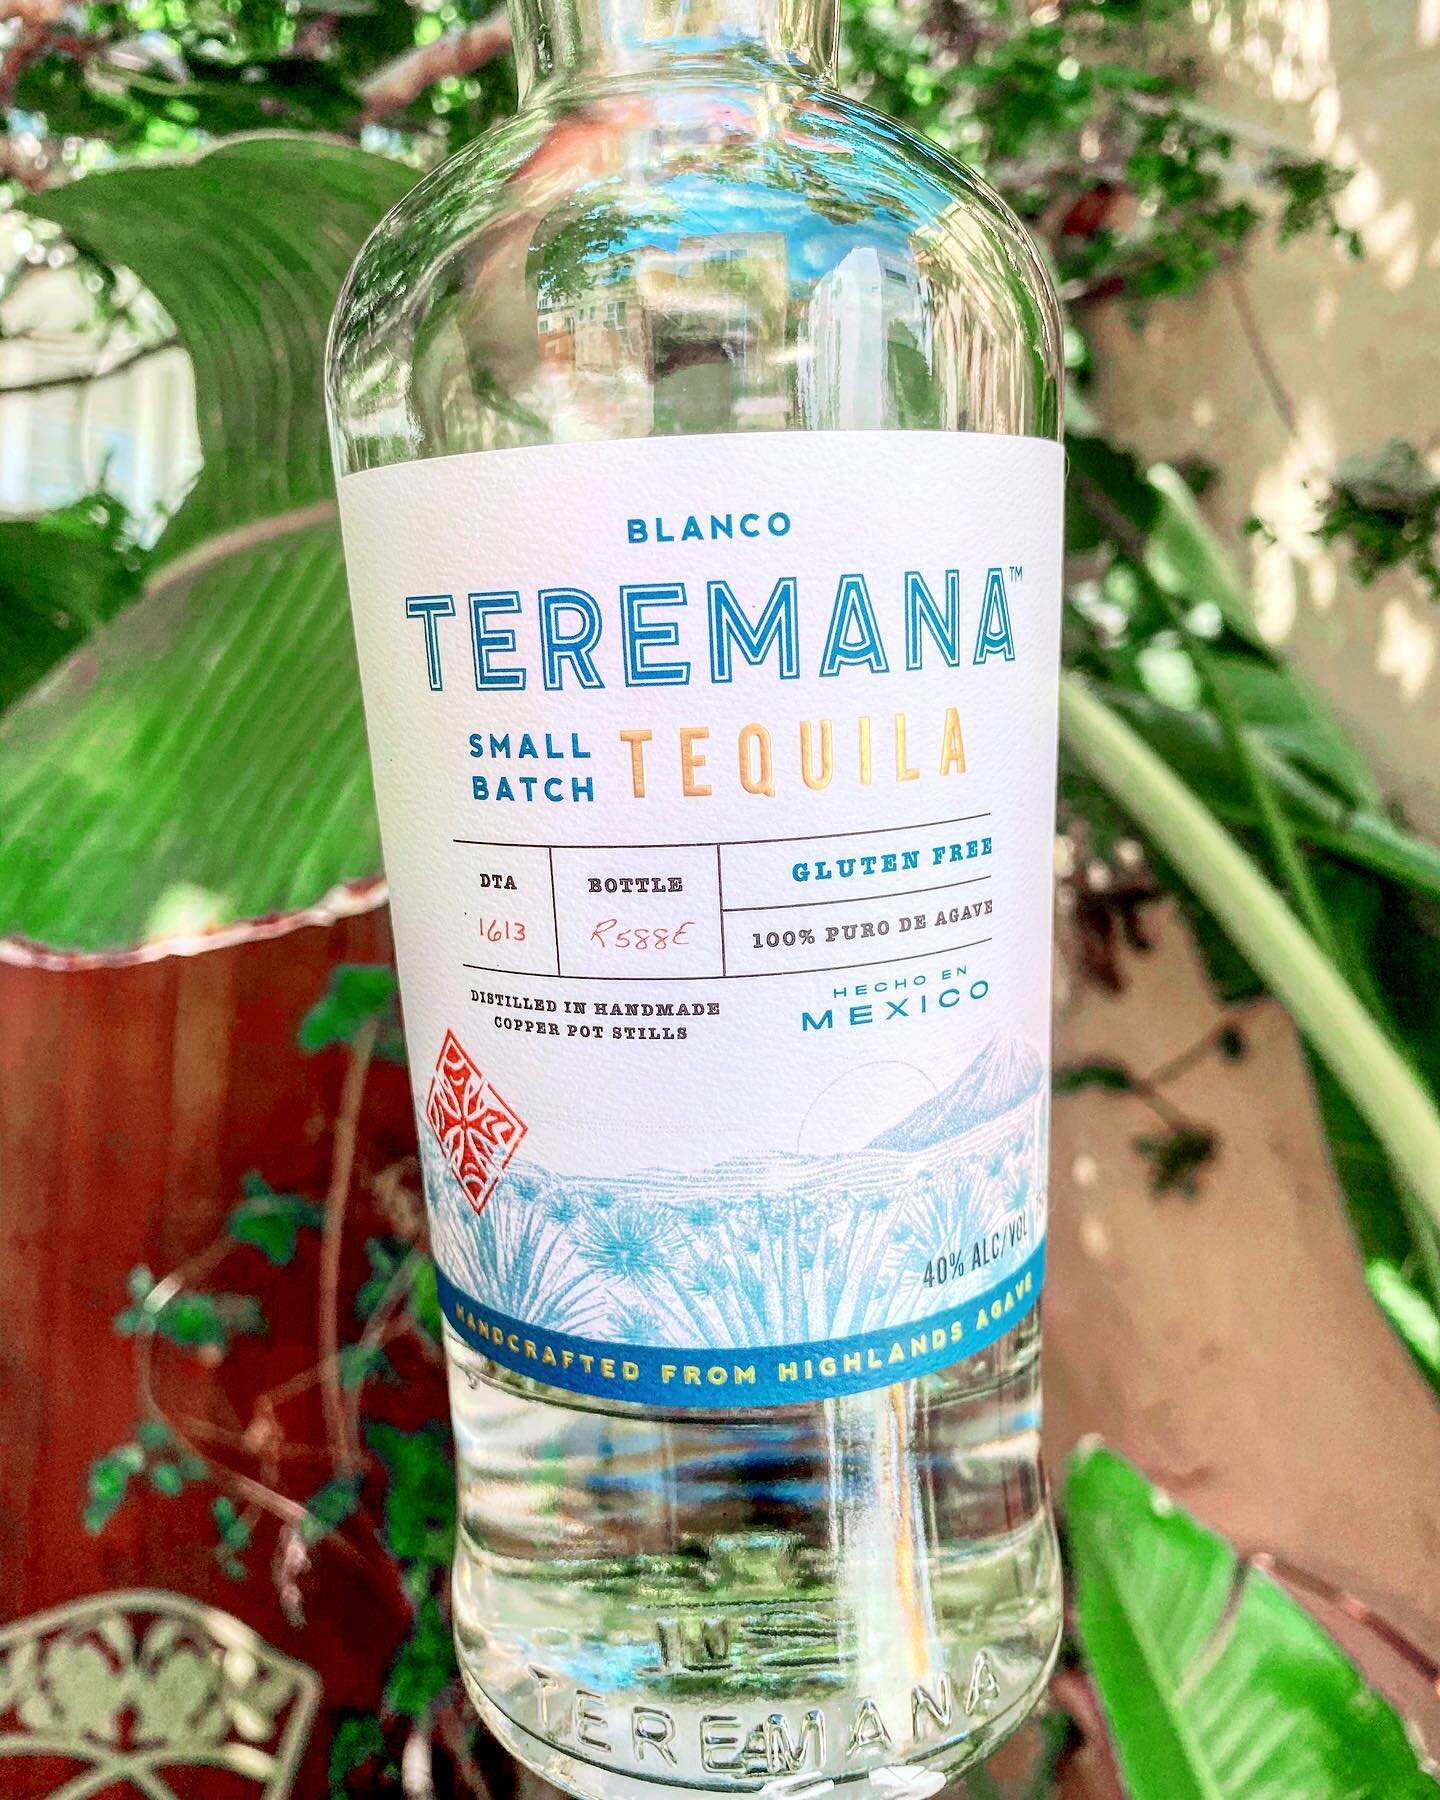 This is the first time I&rsquo;ve posted about tequila, but I just had to share about The Rock&rsquo;s tequila called @teremana ,which is the best tequila I have ever had! 🥃 I got this as a gift from one of my good friends because she knows what a h